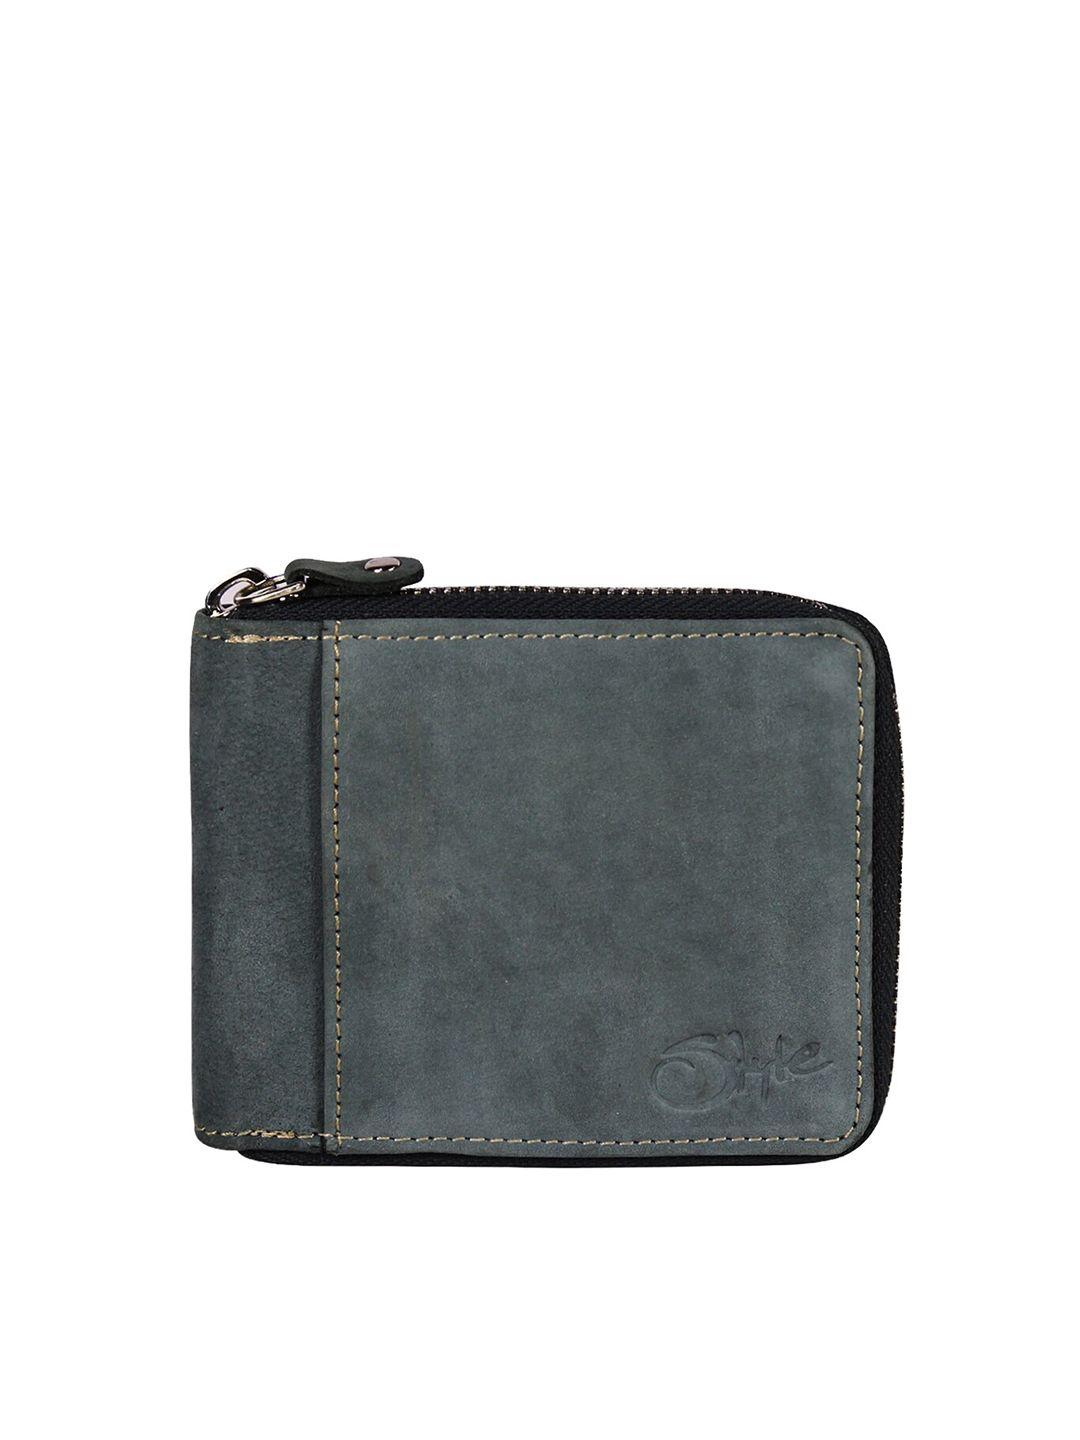 style shoes men grey leather zip around wallet